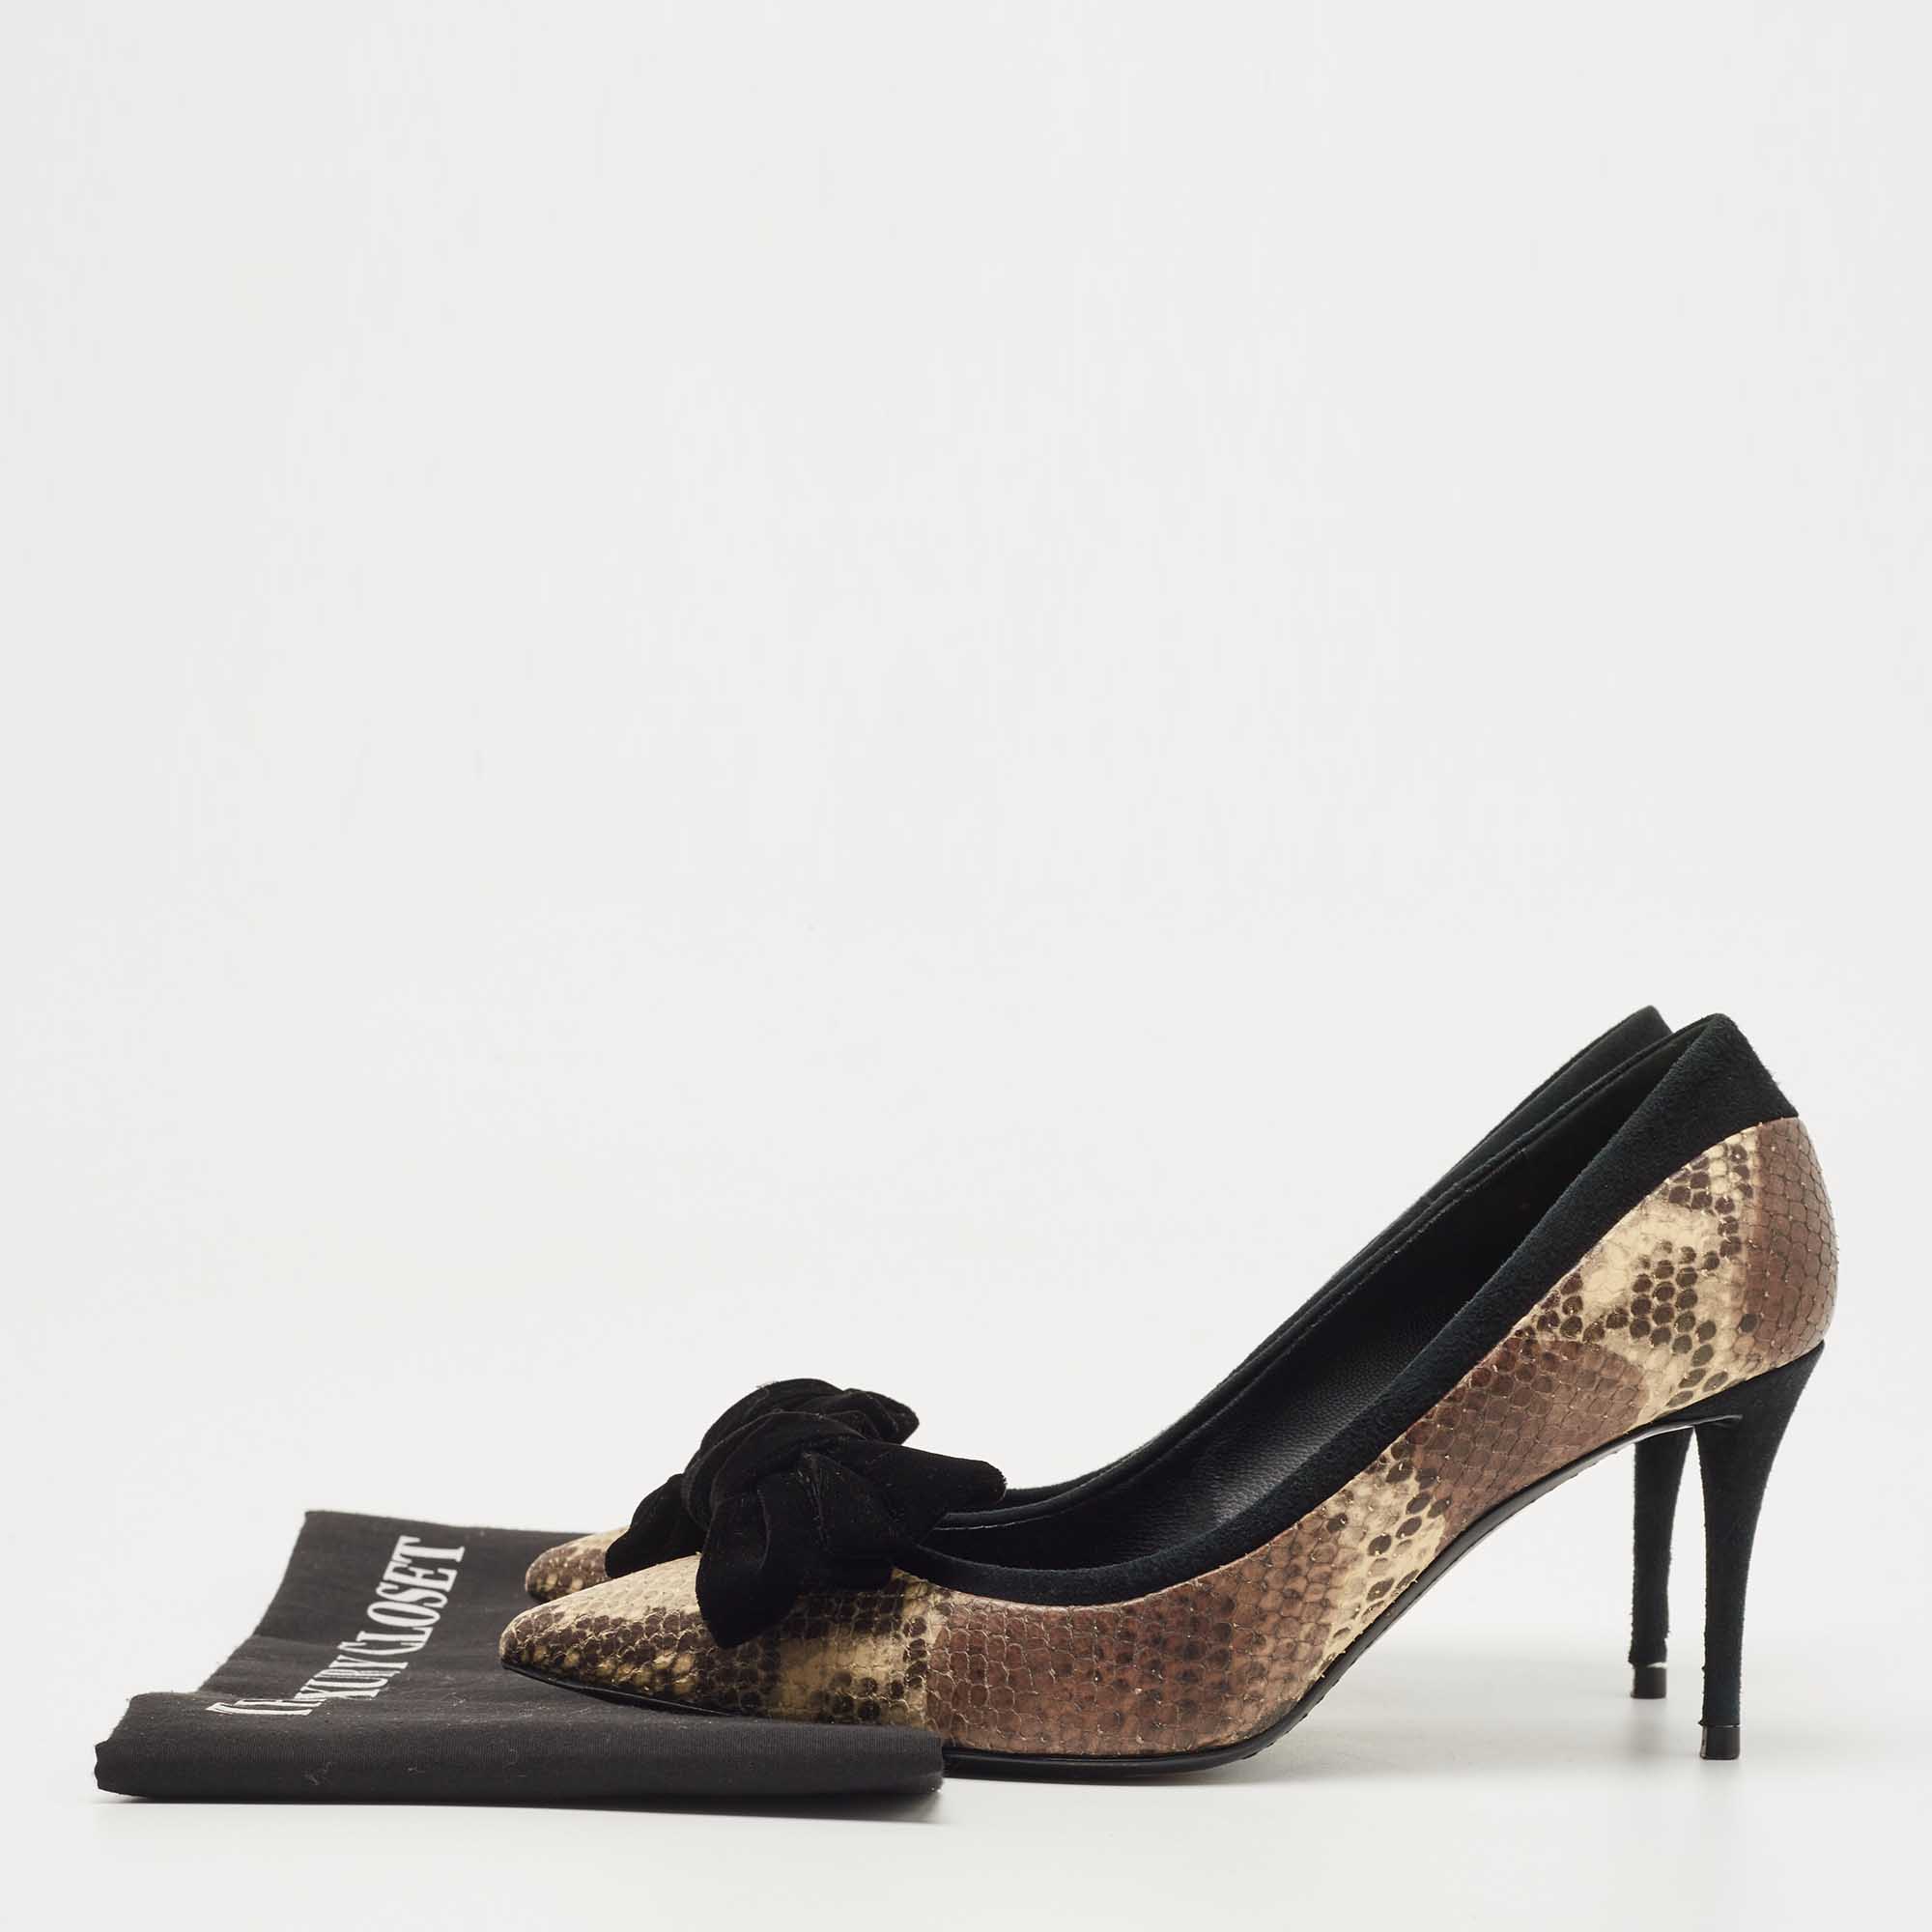 Giuseppe Zanotti Brown/Black Suede And Python Embossed Bow Pointed Toe Pumps Size 39